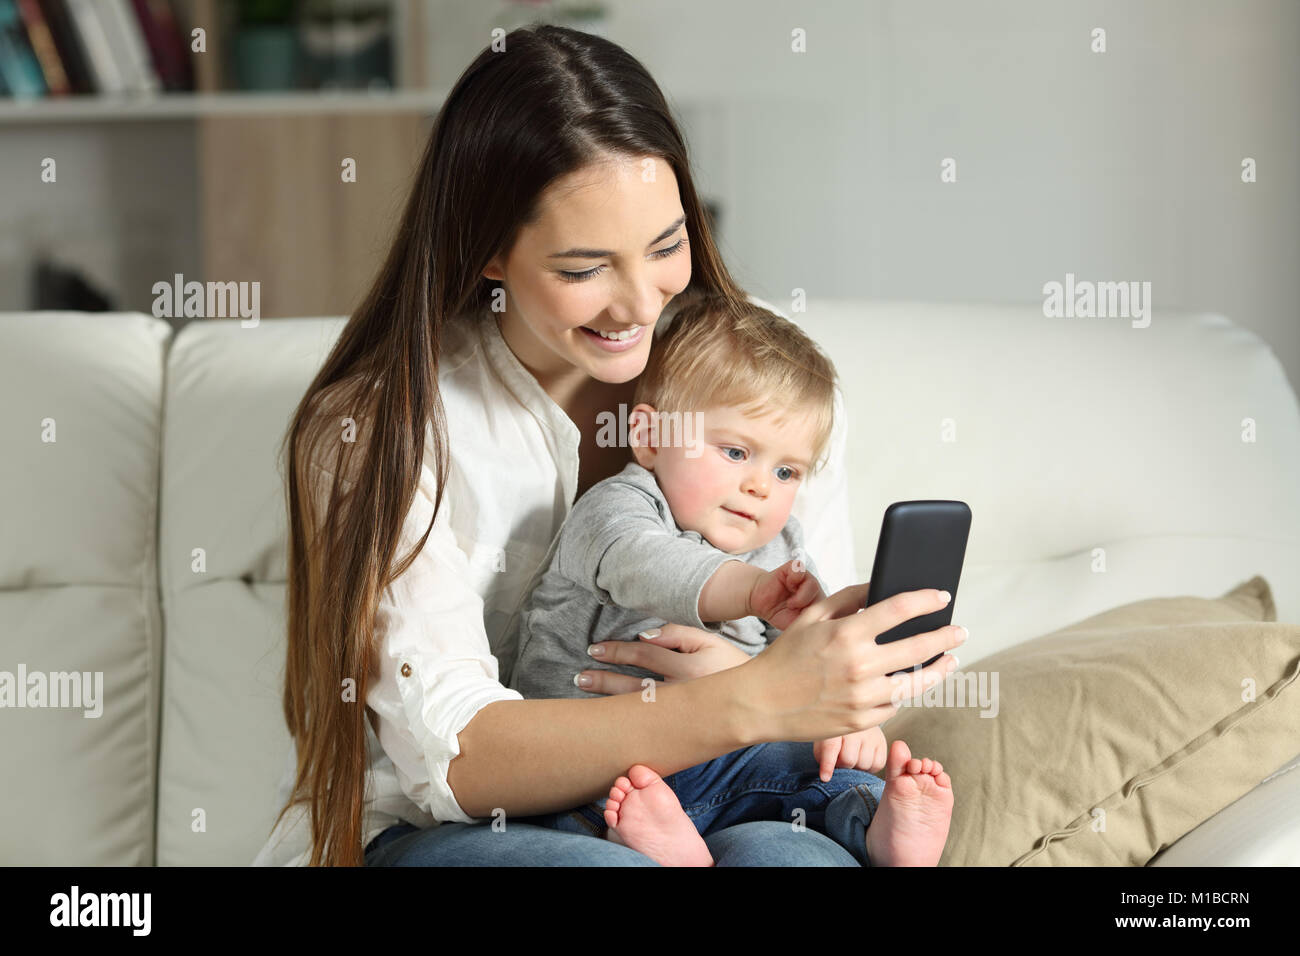 Mother and baby playing with a smart phone sitting on a couch in the living room at home Stock Photo